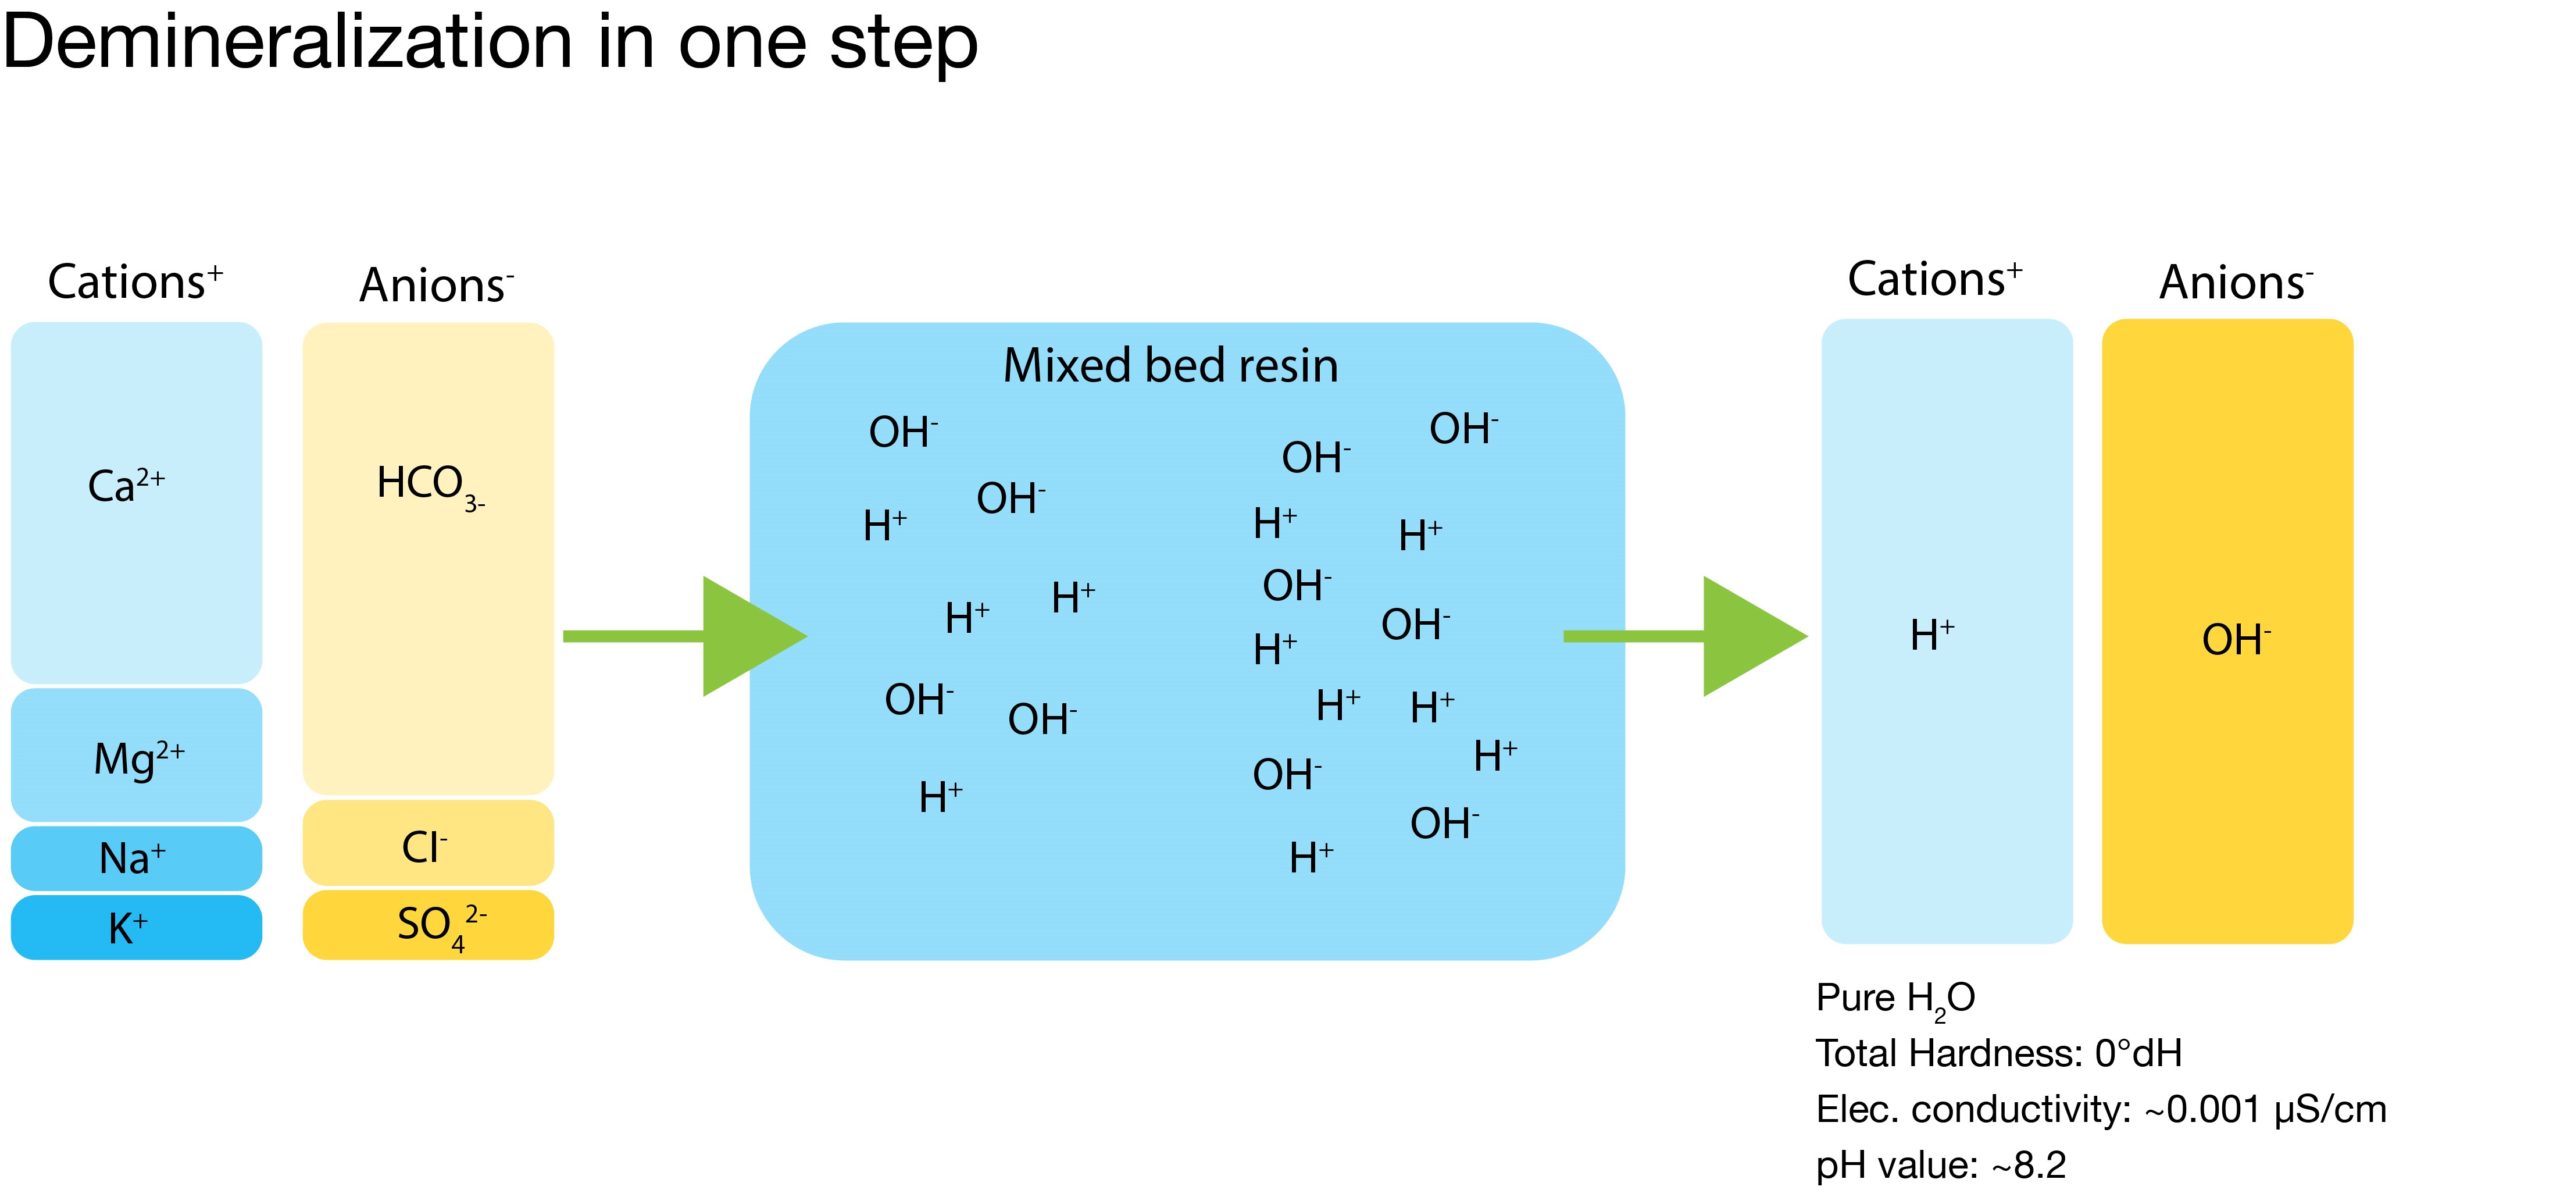 a scientific view of how demineralisation works and resin's role in that